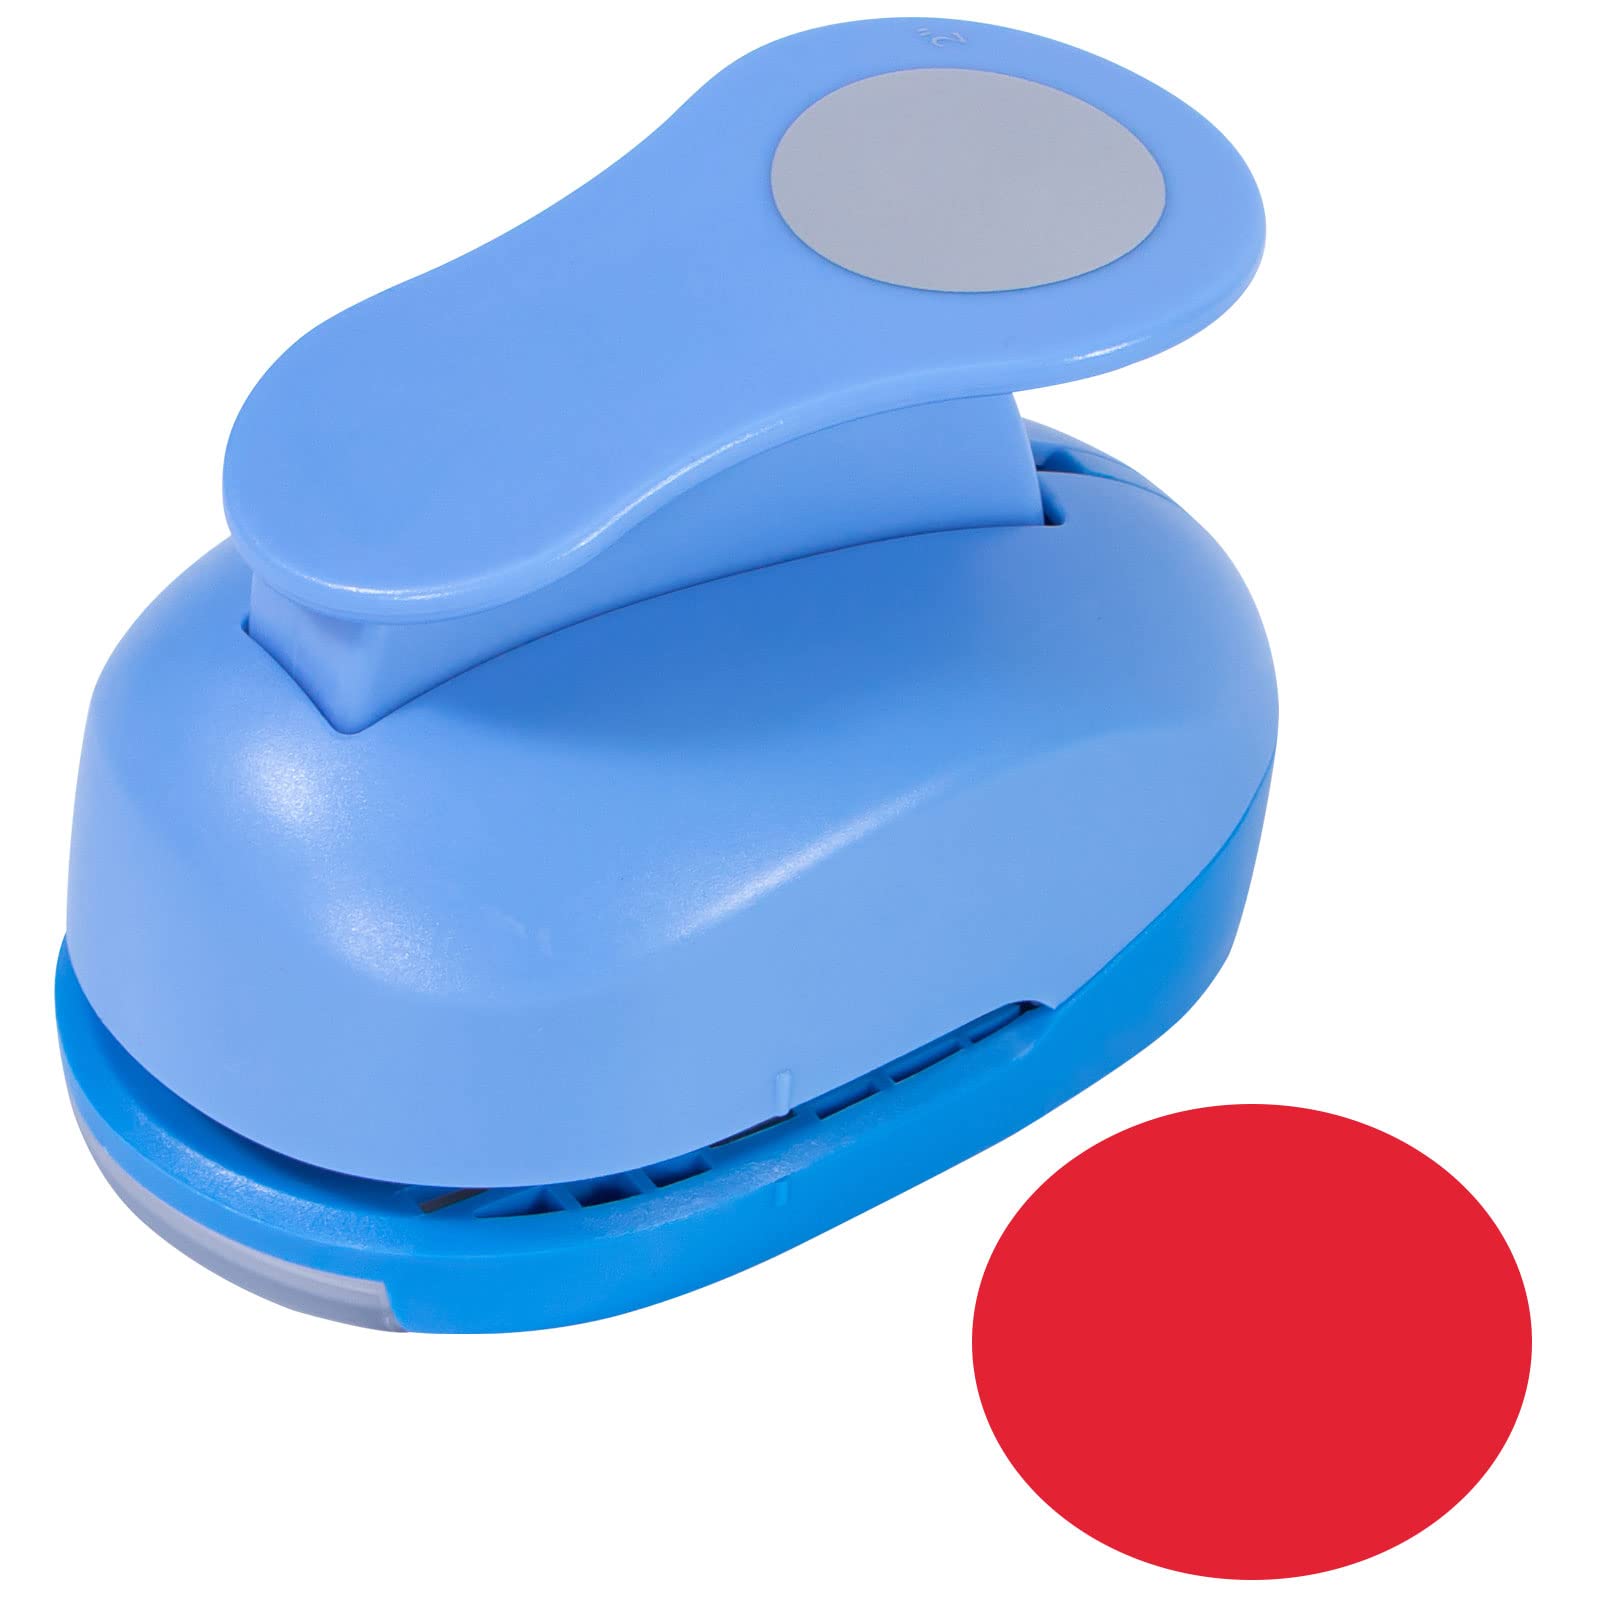 Circle Punch 2 Inch Craft Hole Punch - Circle Scrapbooking Puncher